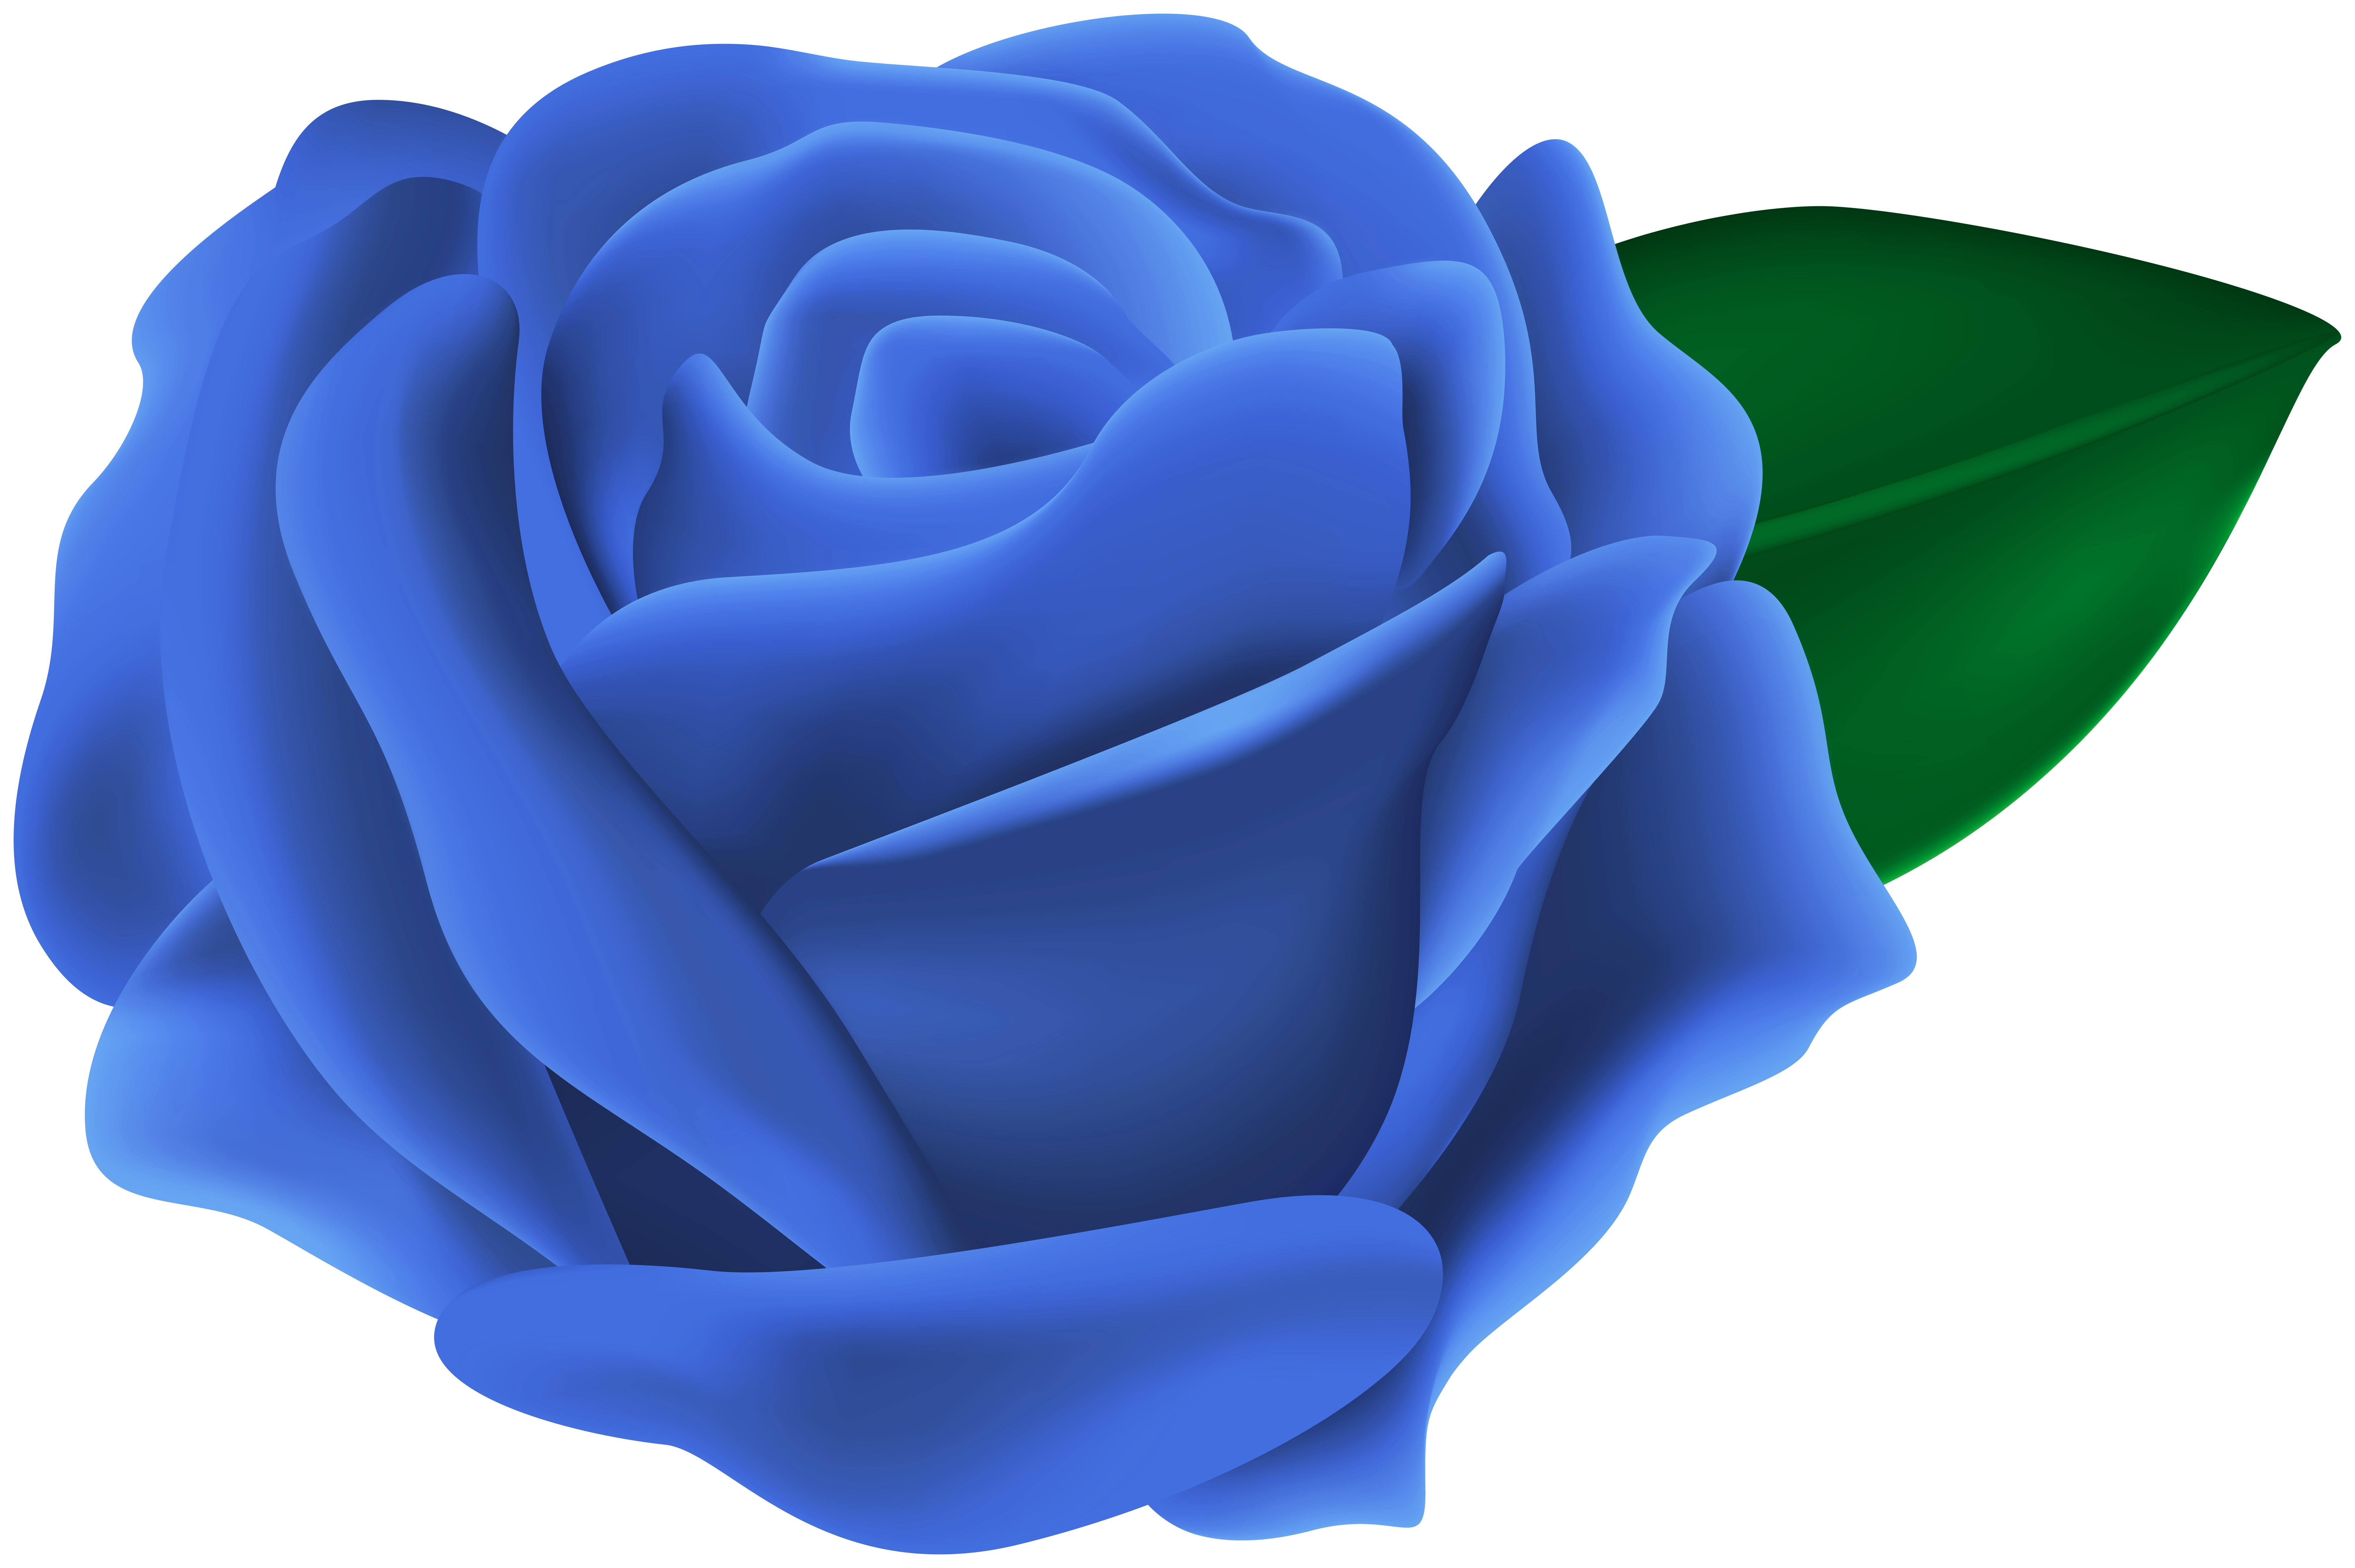 Transparent Blue Rose Png Clipart Gallery Yopriceville High Quality Images And Transparent Png Free Clipart